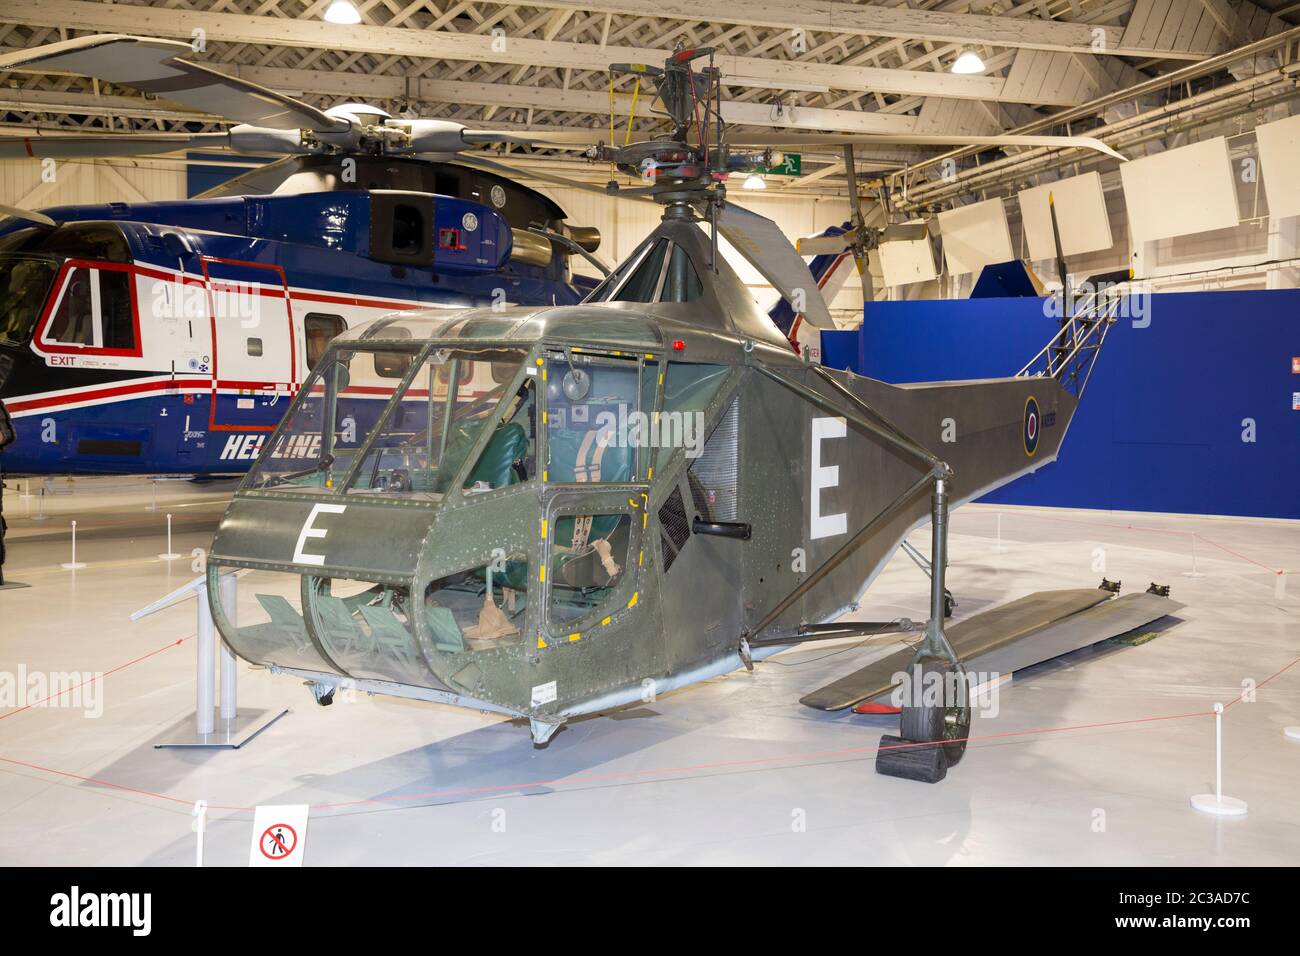 Sikorsky R-4B Hoverfly Helicopter, on display / an exhibit at the RAF Royal air force Museum in Hendon, London UK. (117) Stock Photo